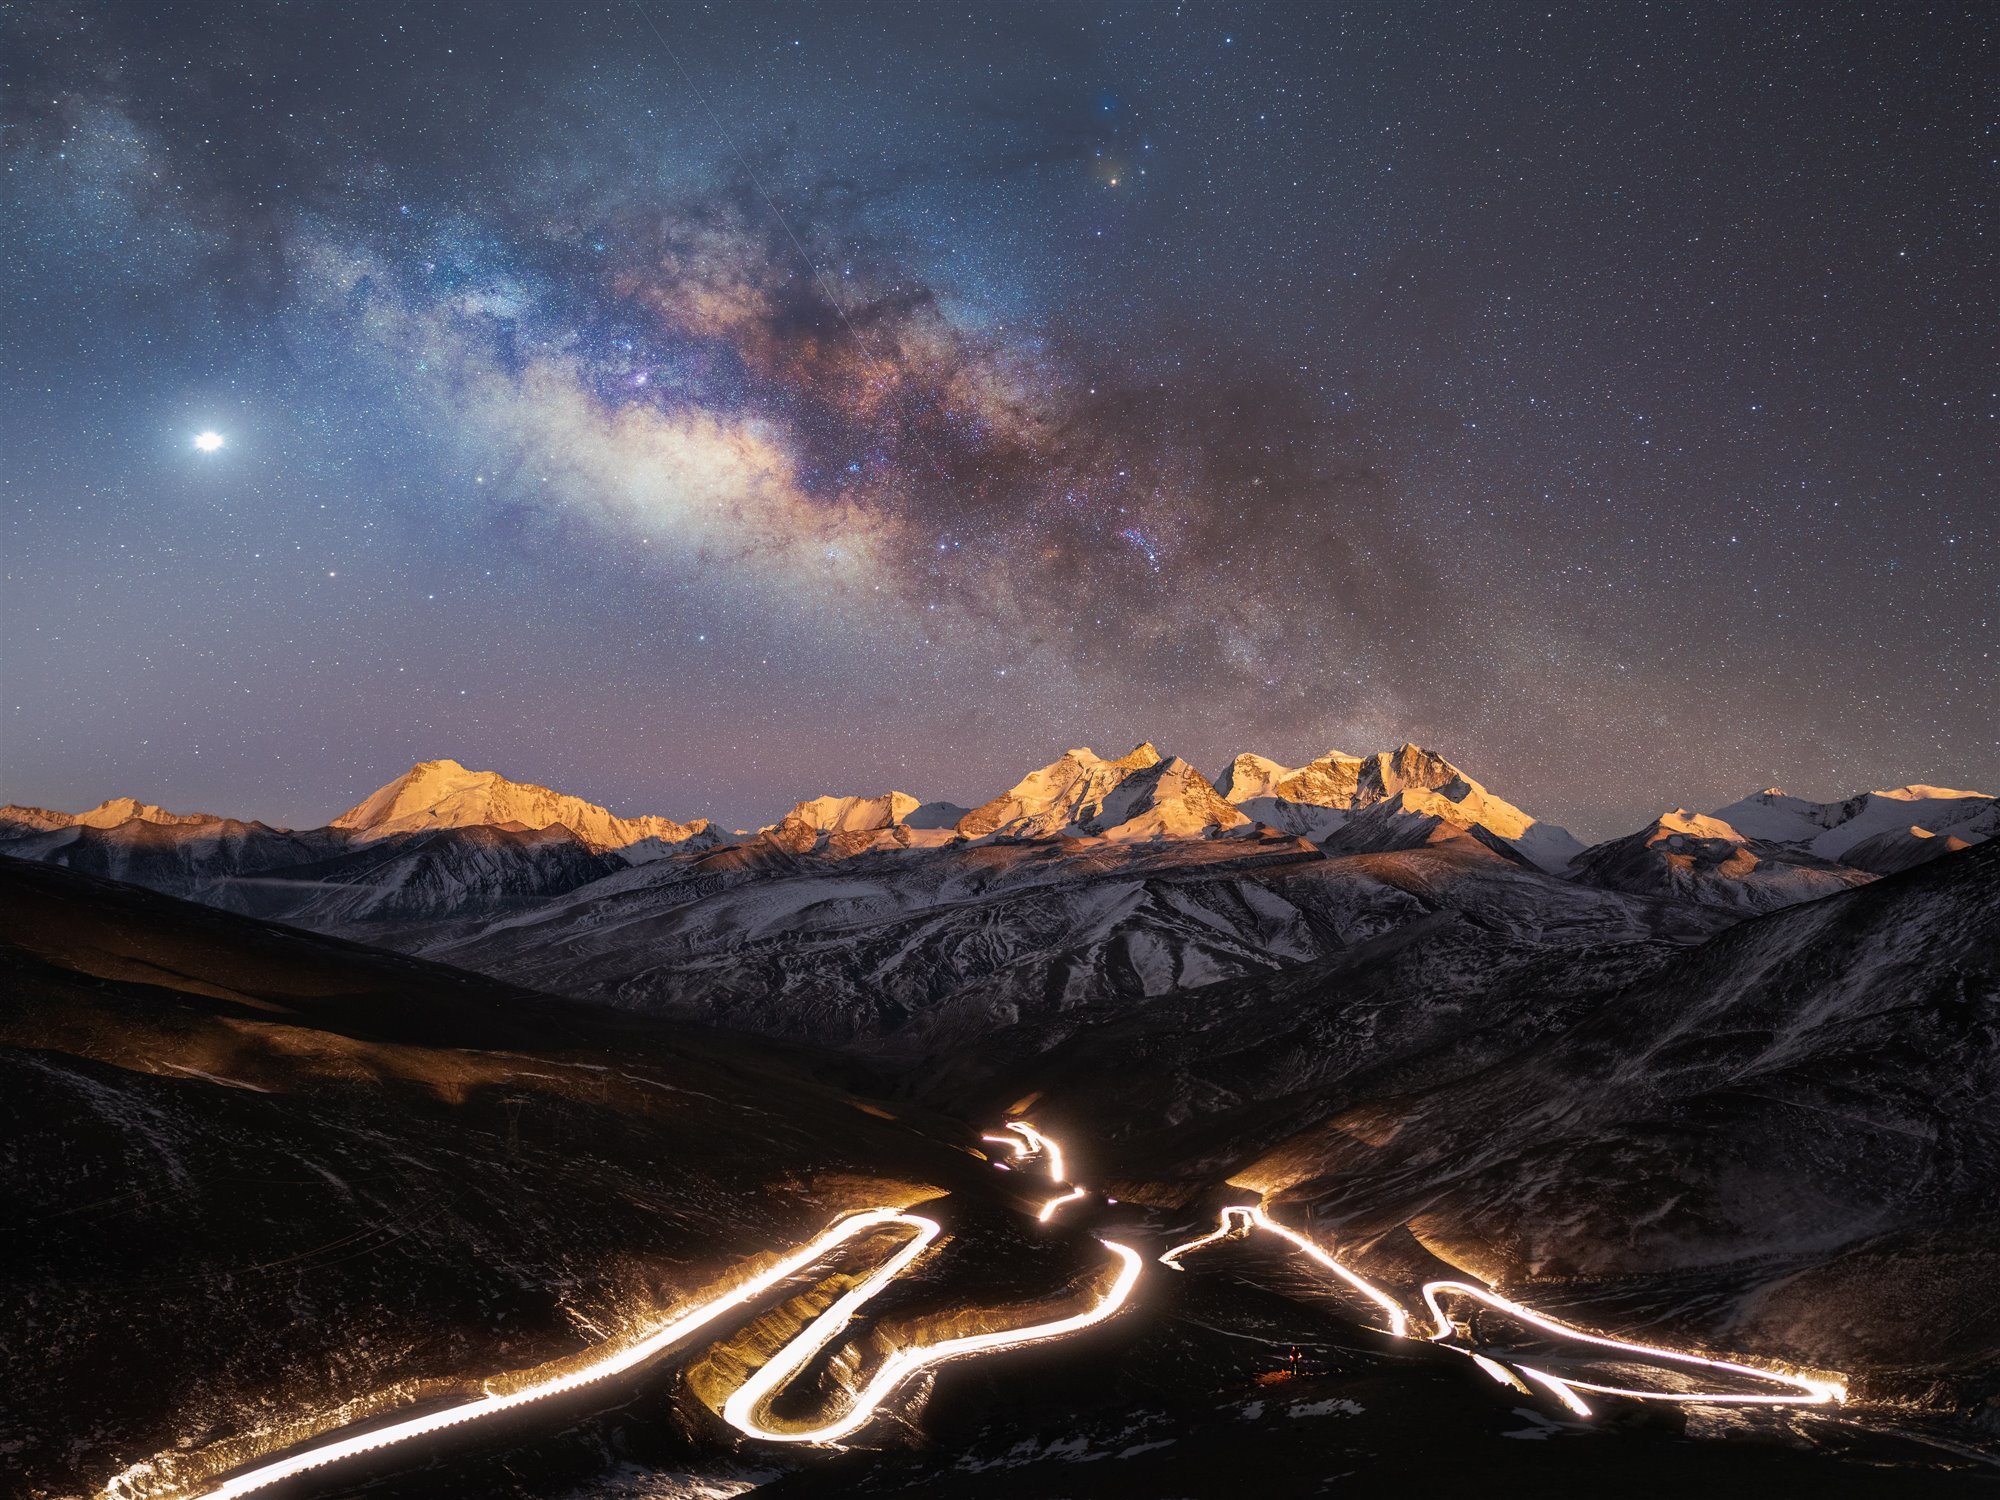 The starry sky over the world's highest national highway